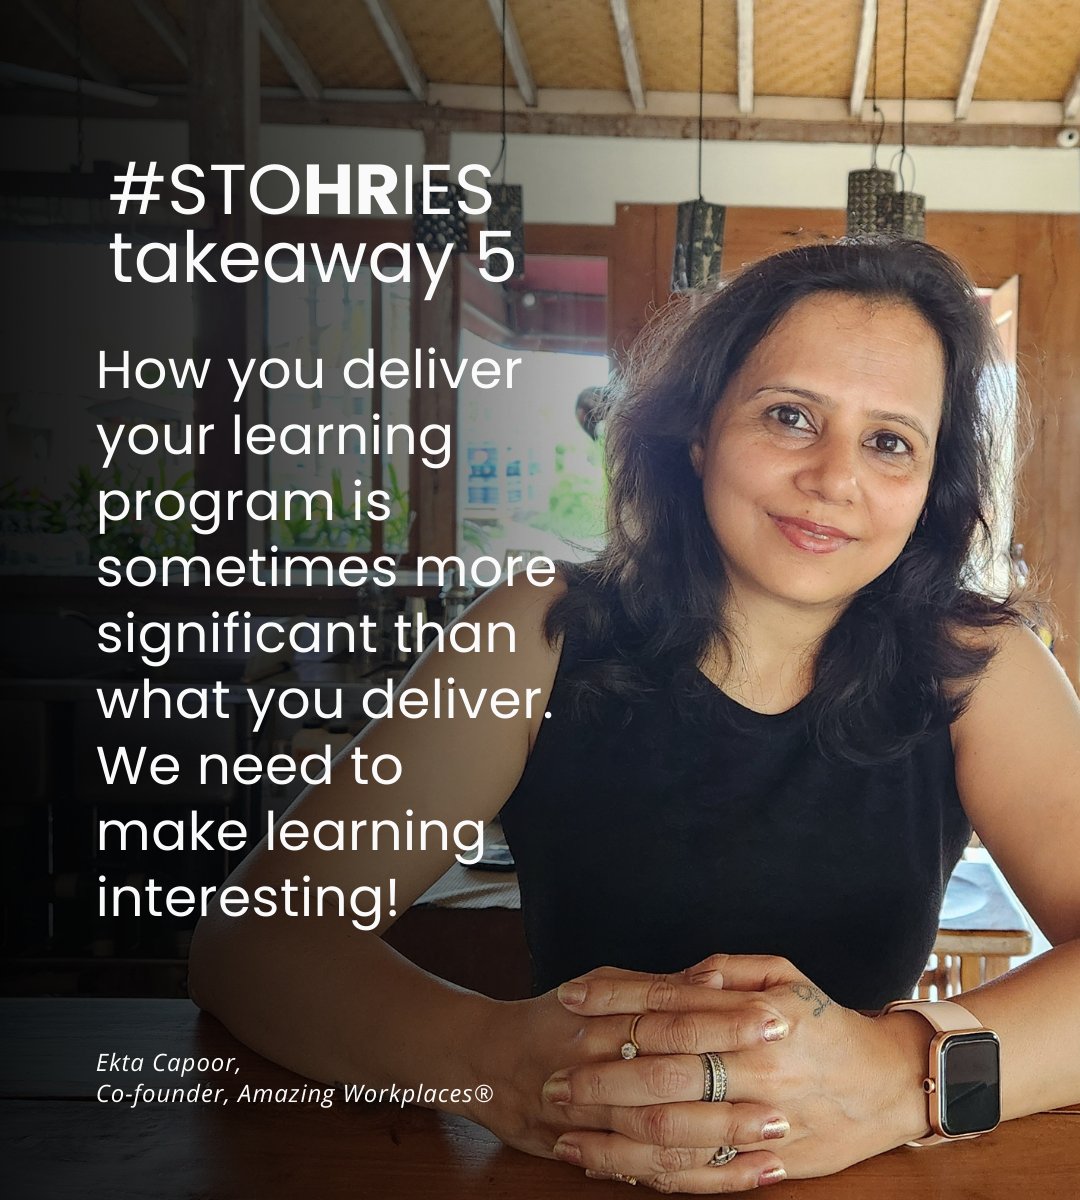 Create active participants in your own organization's learning journey. This interactive and engaging approach will not only make learning more enjoyable but also significantly improve knowledge retention and application.

#STOHRIES #HR #LearningAndDevelopment #AmazingWorkplaces